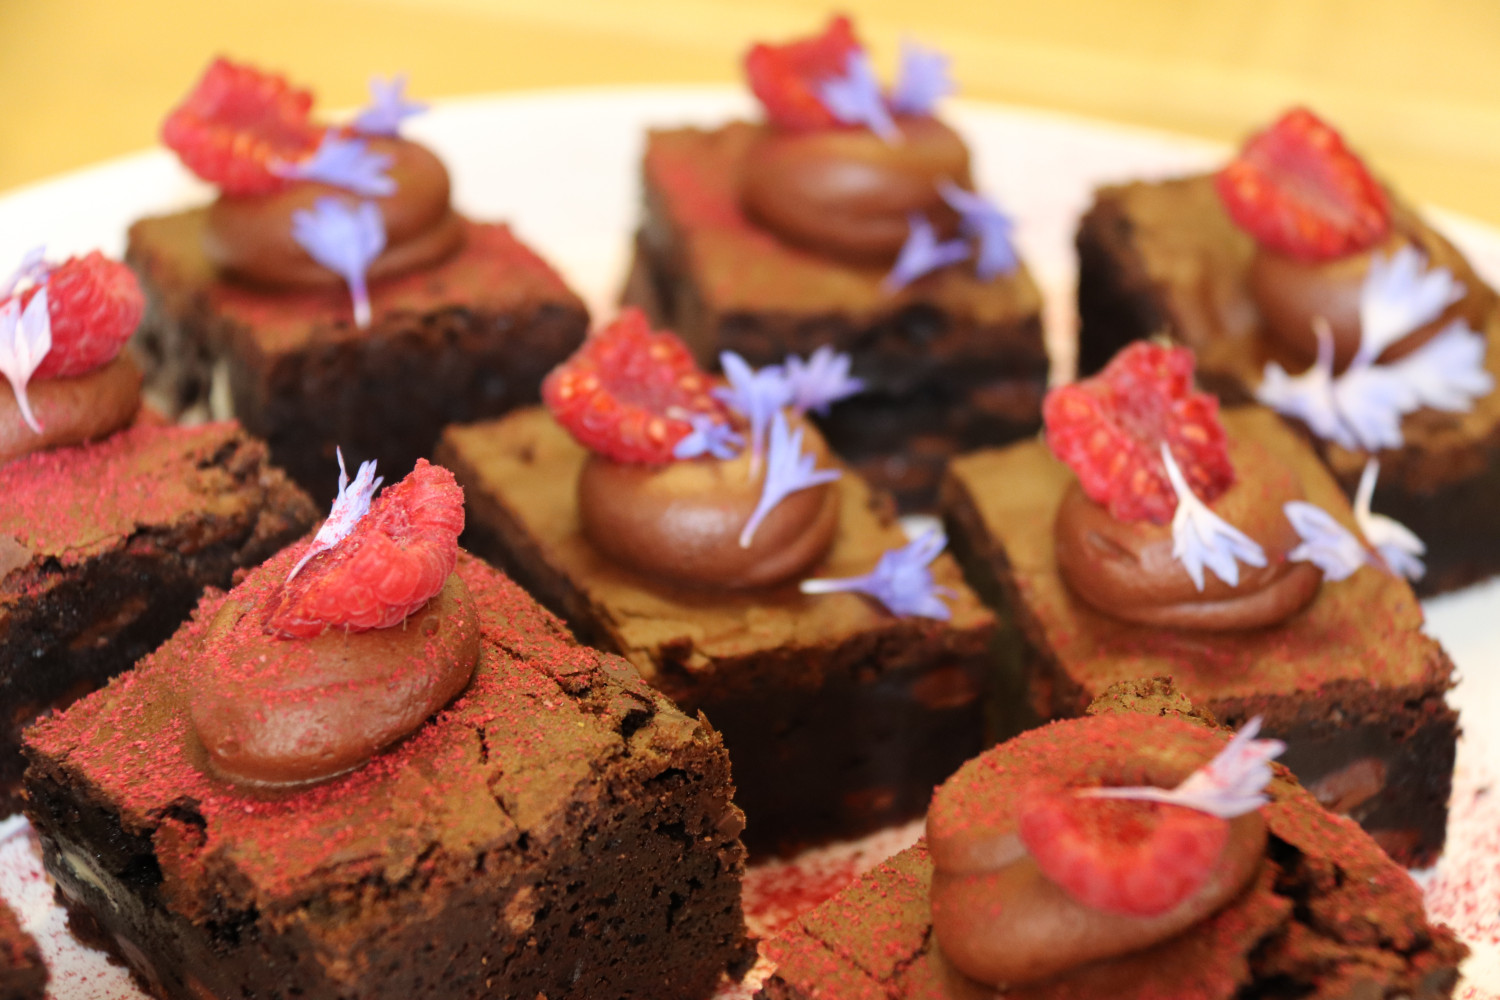 Photo of a plate of chocolate brownie topped with fresh raspberries